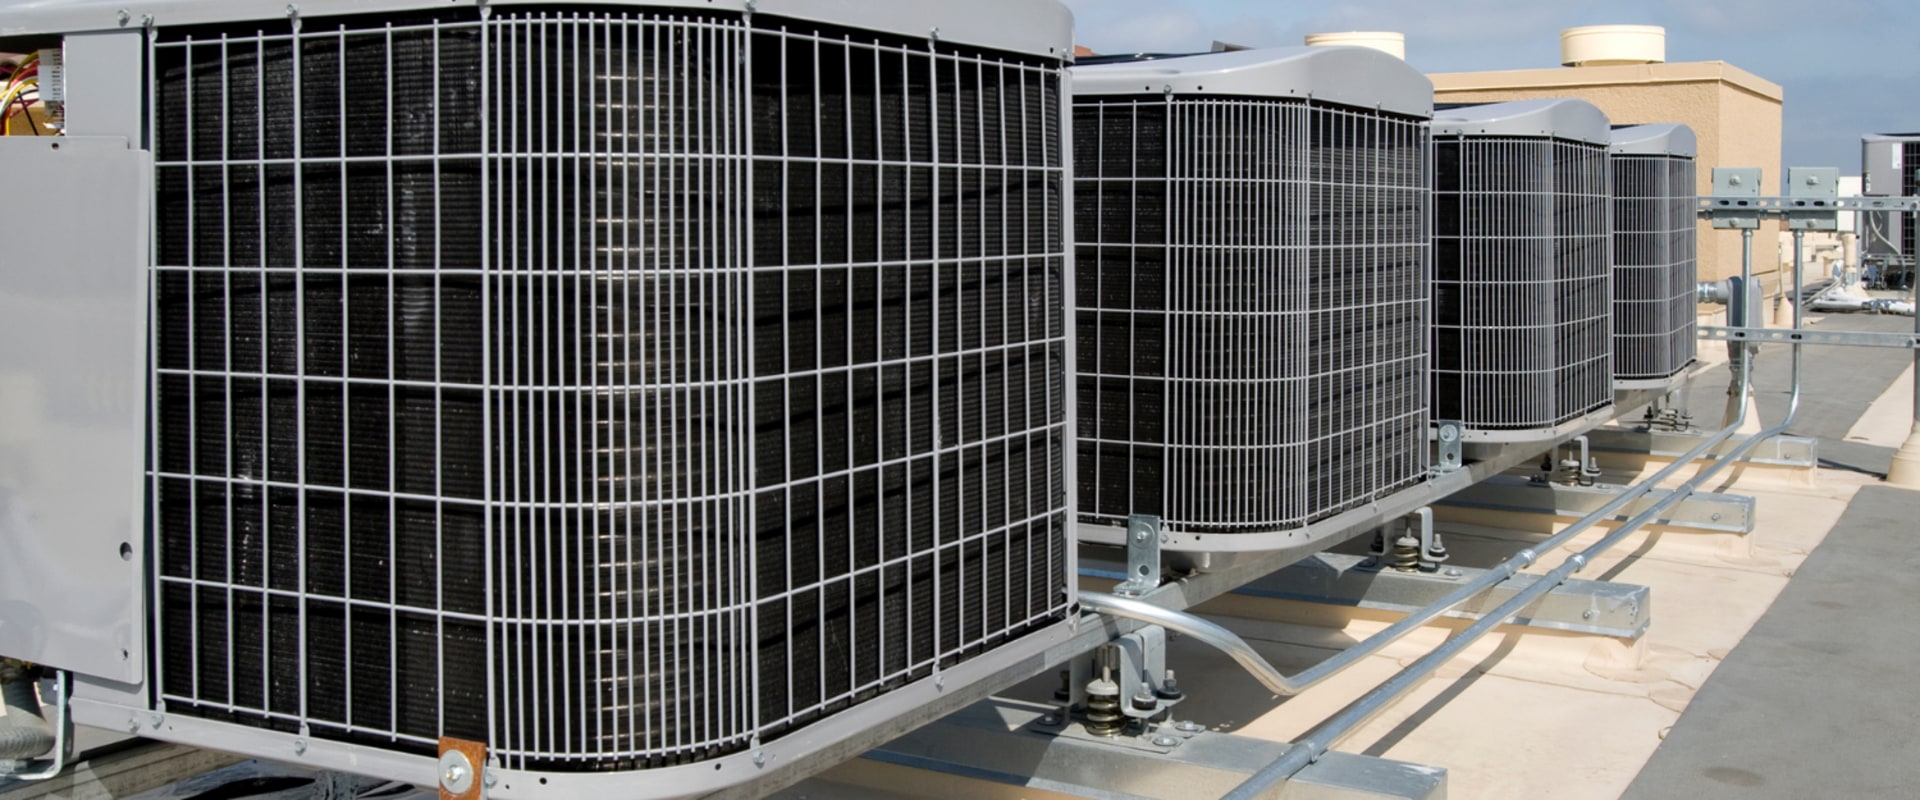 Installing an Air Ionizer in a Commercial Building in West Palm Beach, FL: A Comprehensive Guide